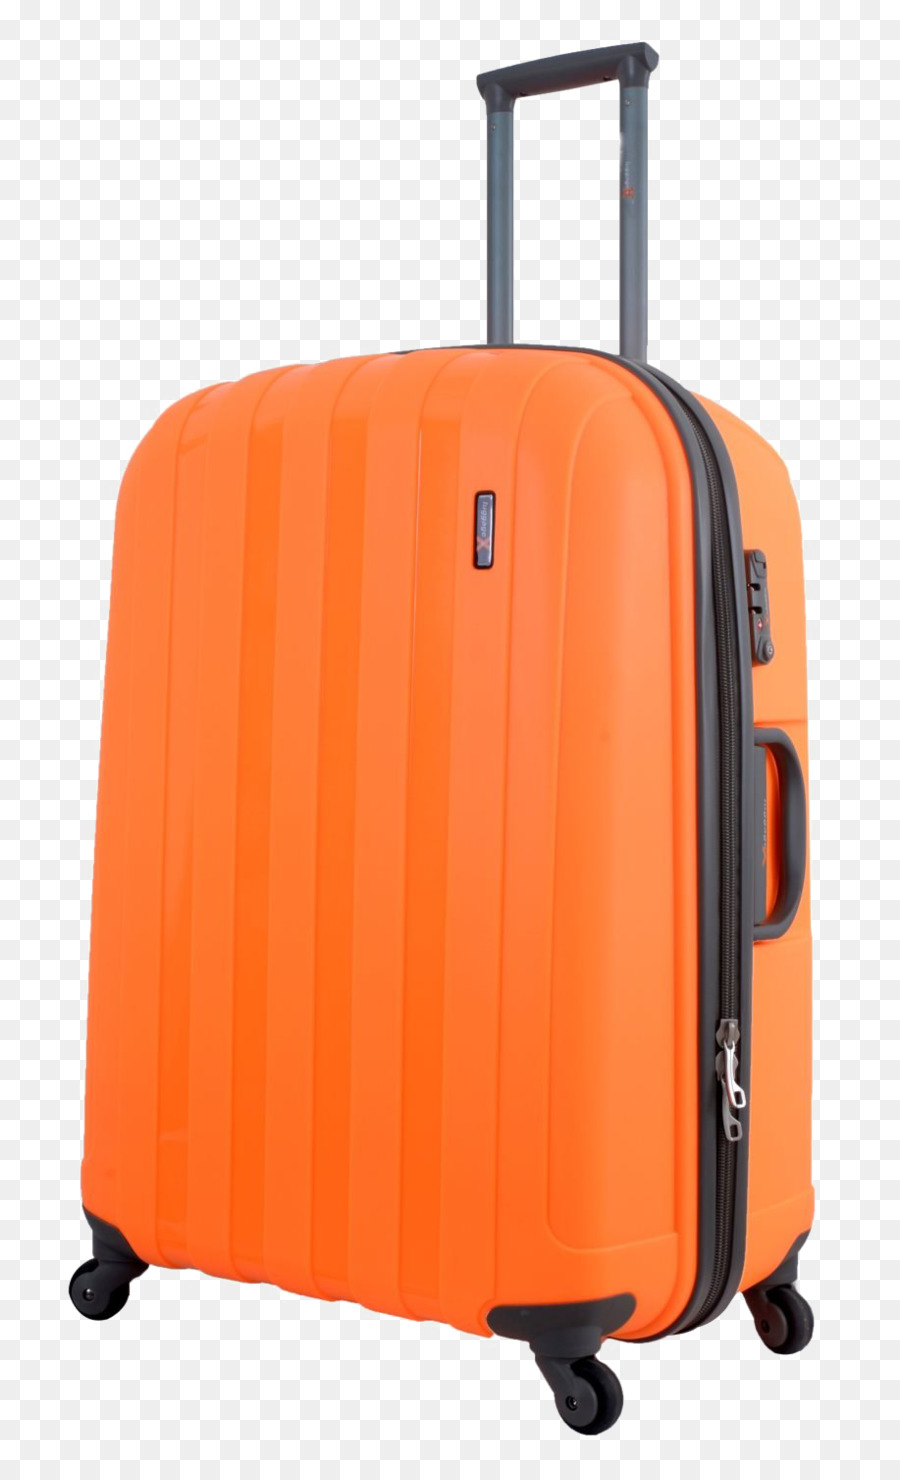 Suitcase Baggage Travel Hand luggage Trolley Case - suitcase png download - 917*1500 - Free Transparent Suitcase png Download.